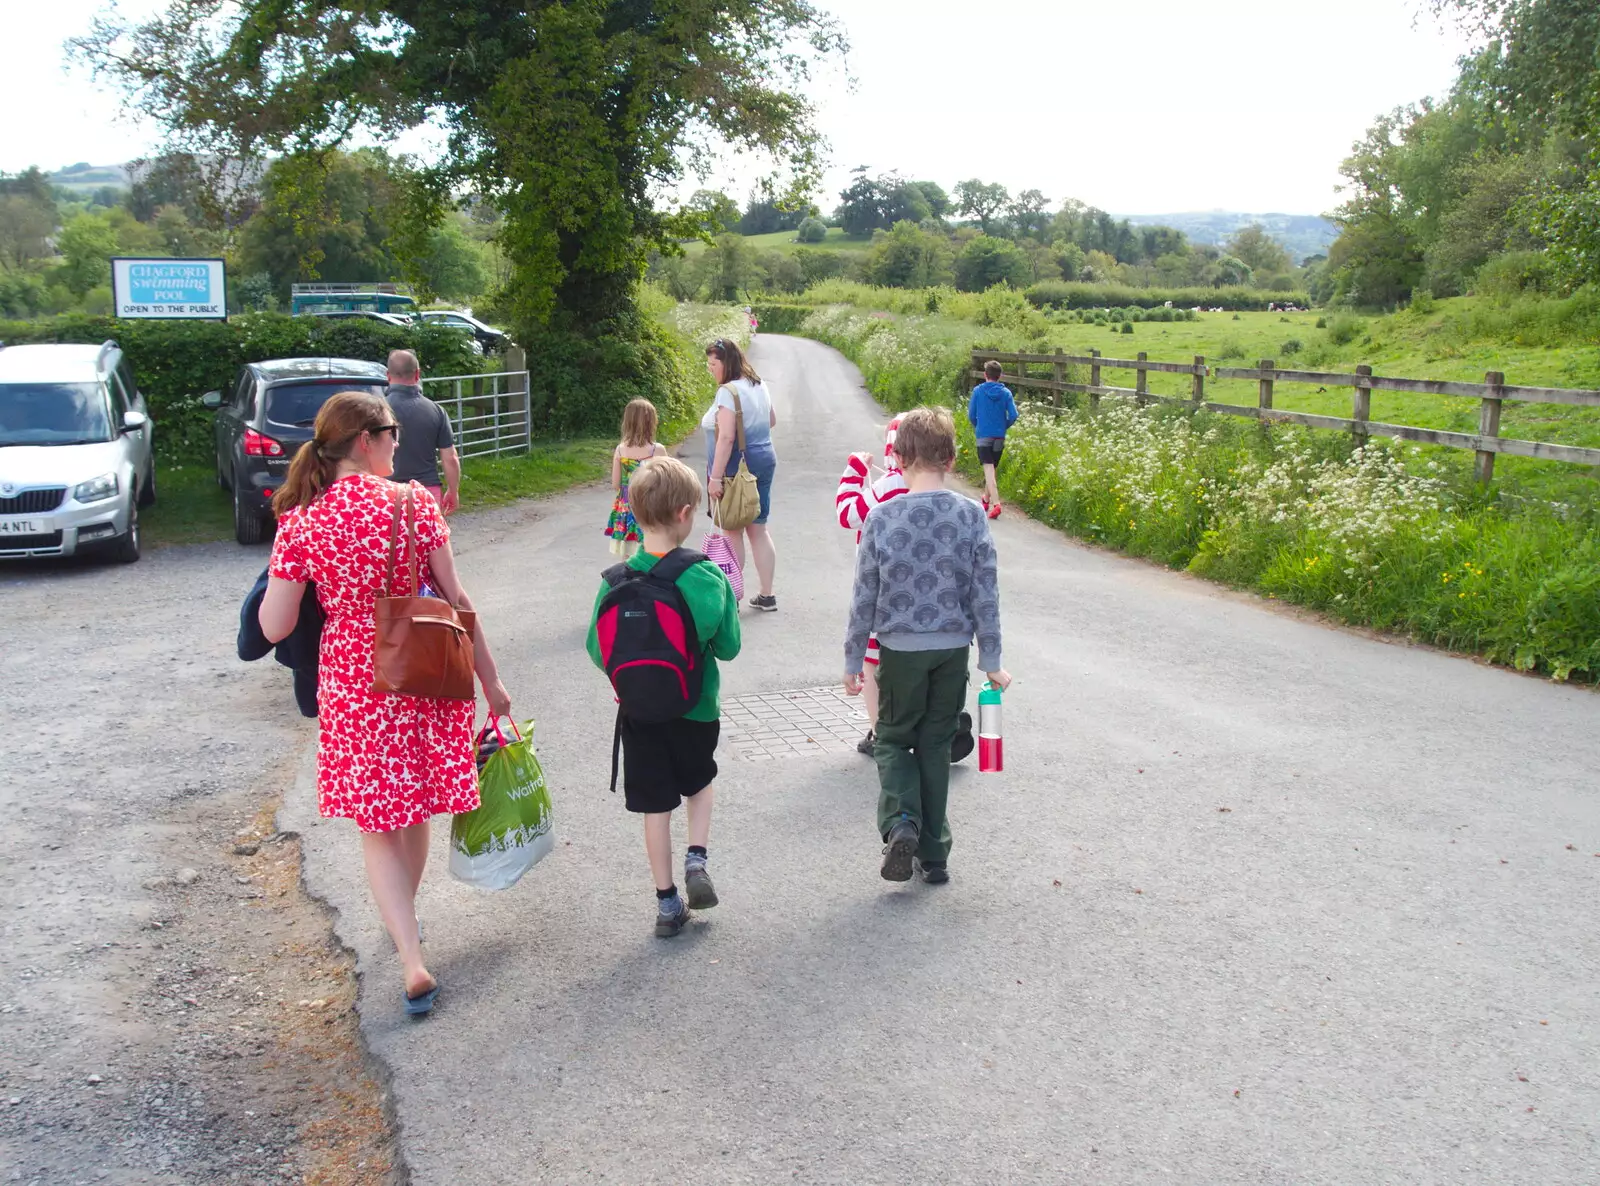 We head back to the car park, from Chagford Lido and a Trip to Parke, Bovey Tracey, Devon - 25th May 2019